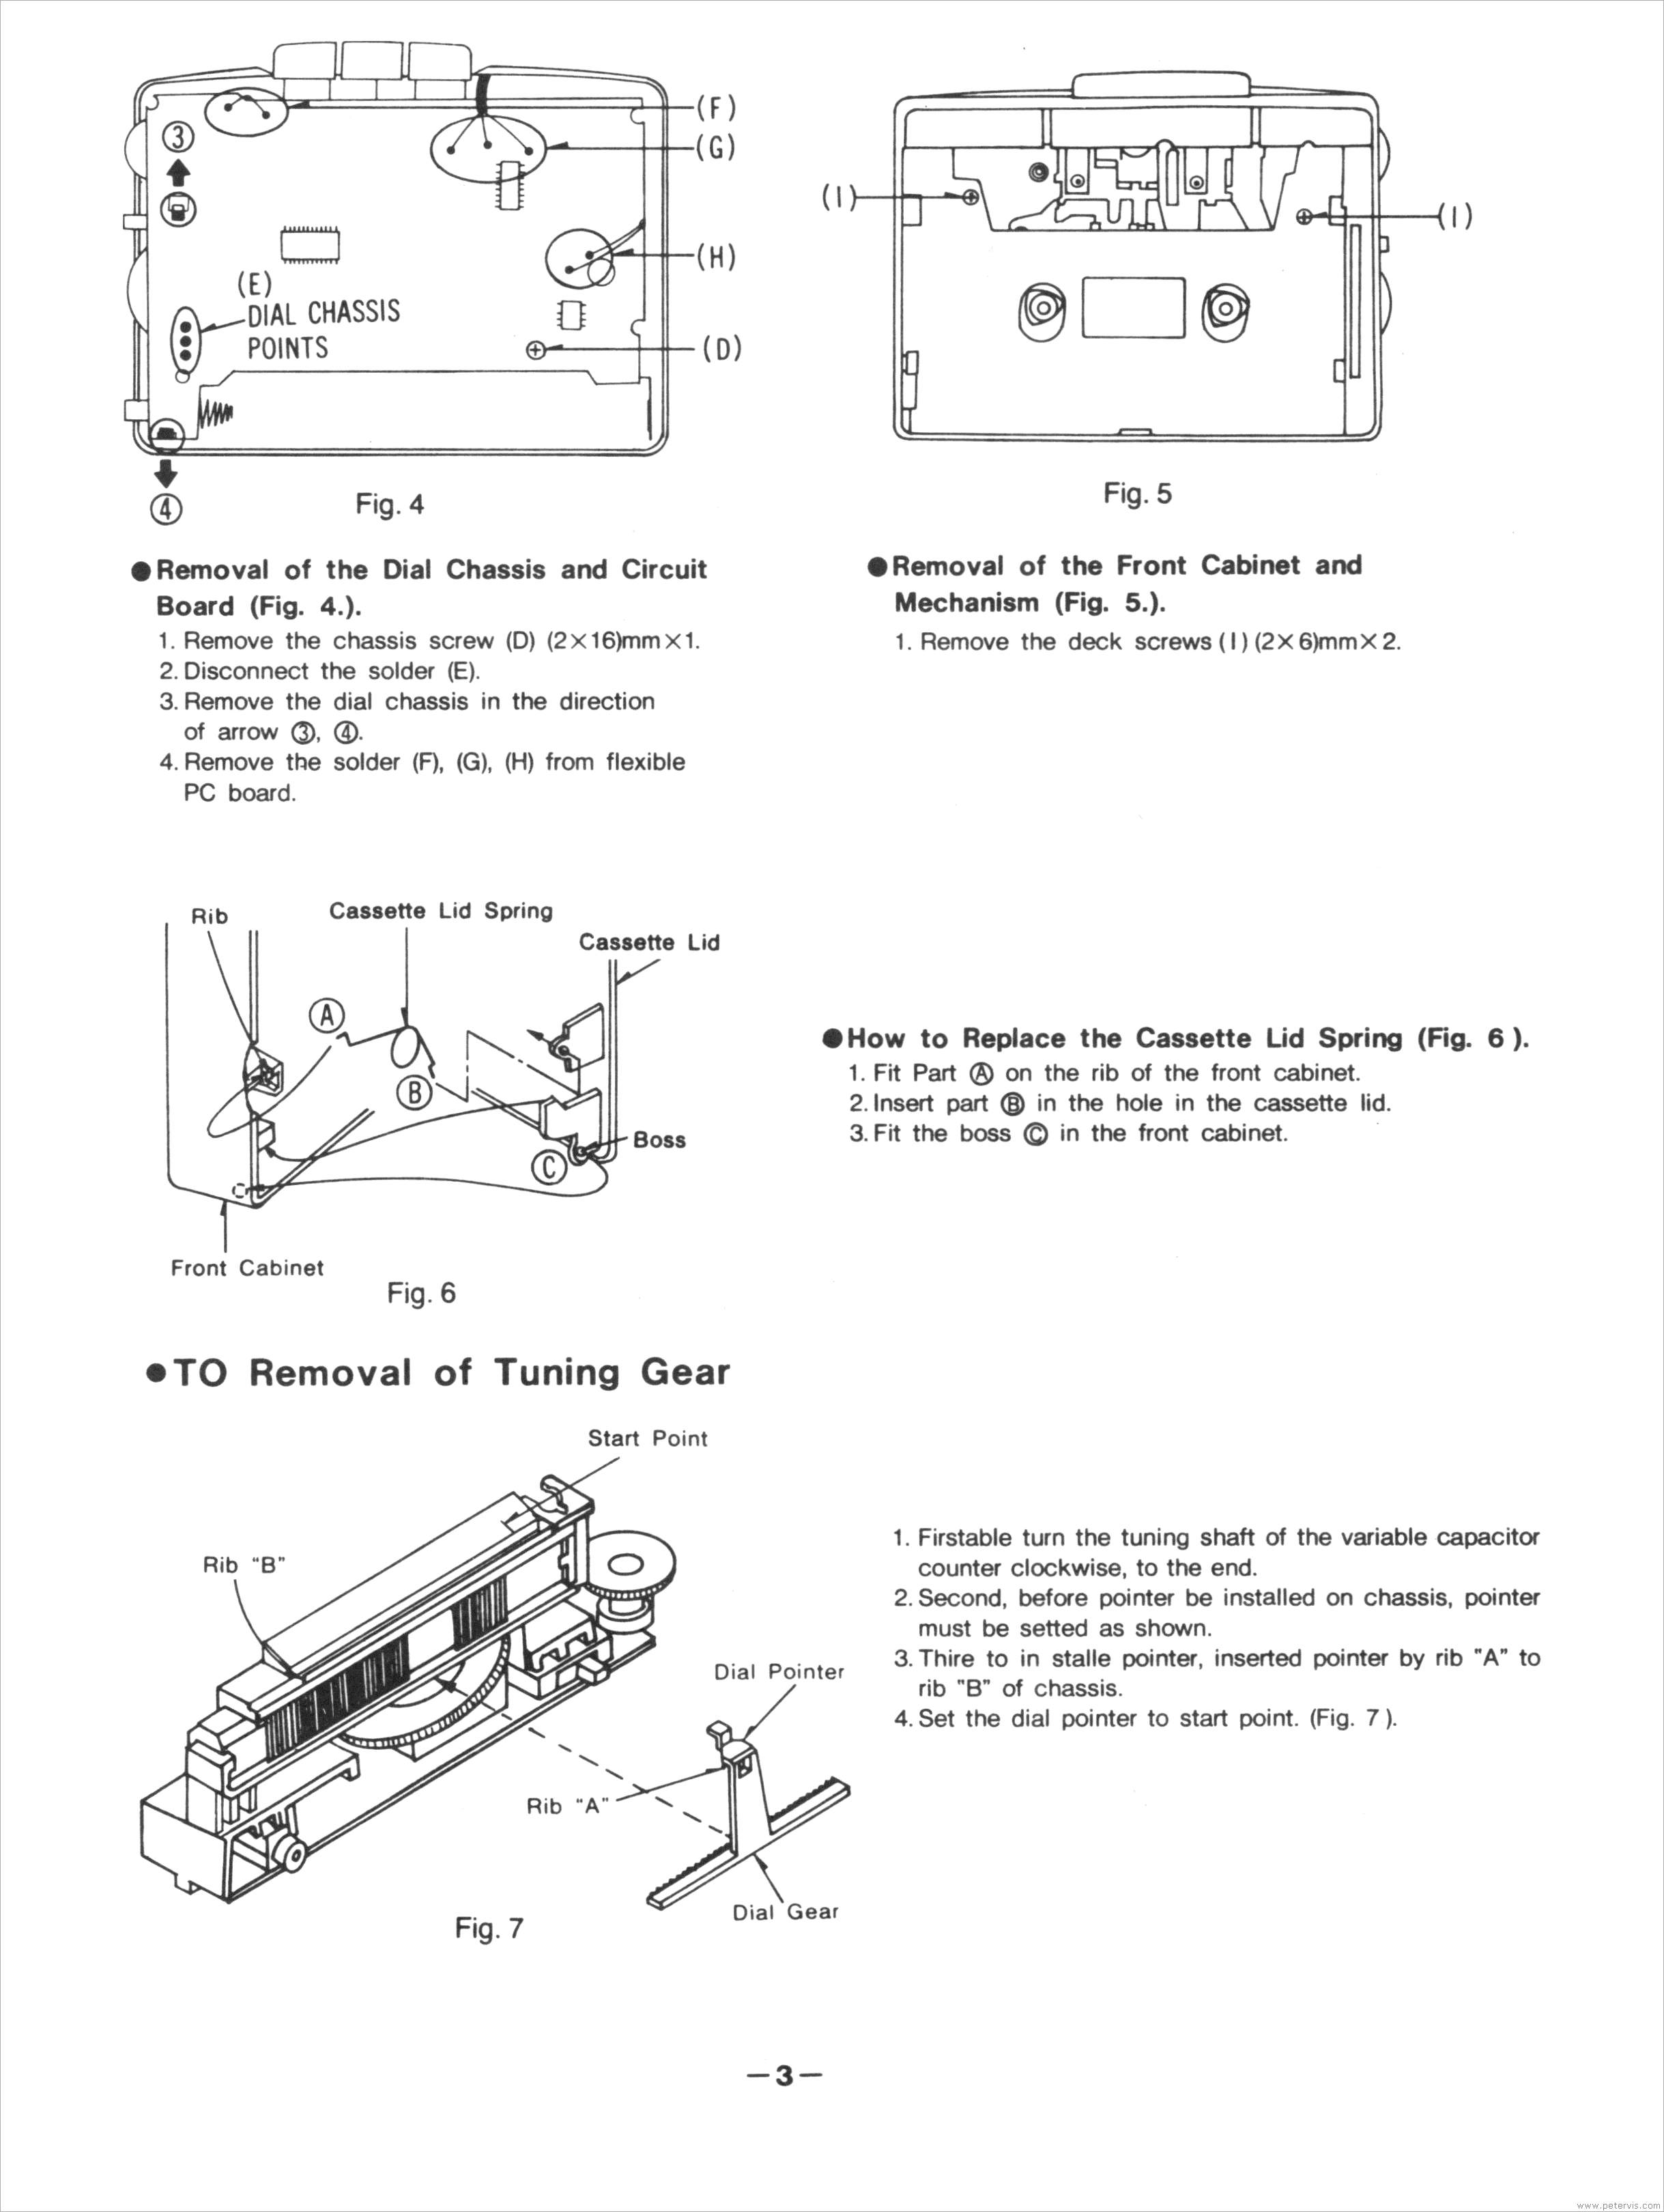 Removal of Tuning Gear